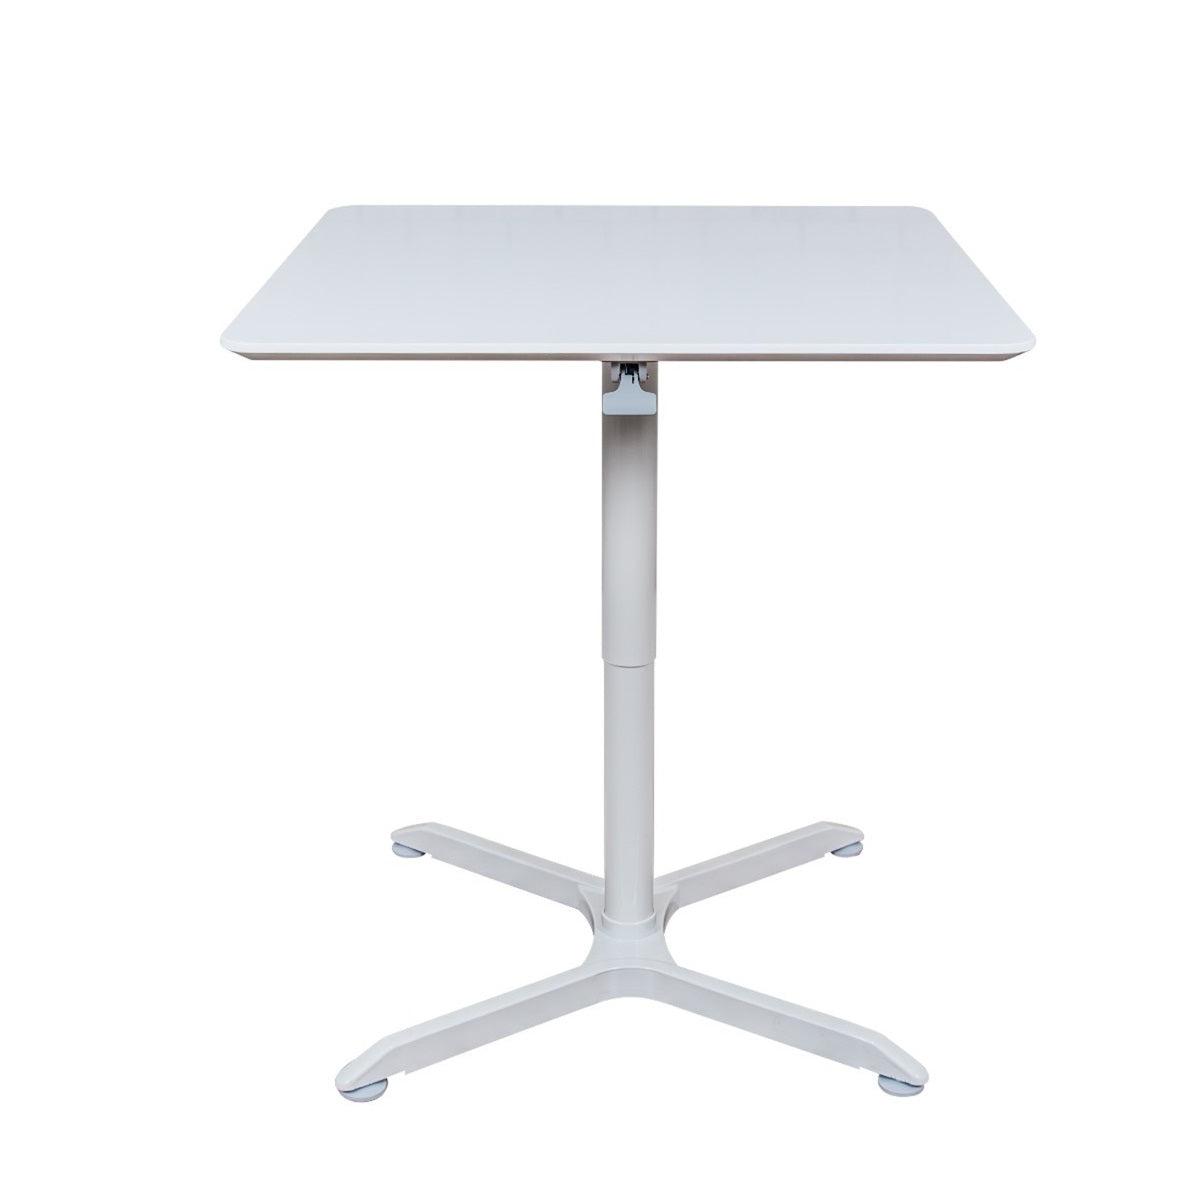 Standing Tables